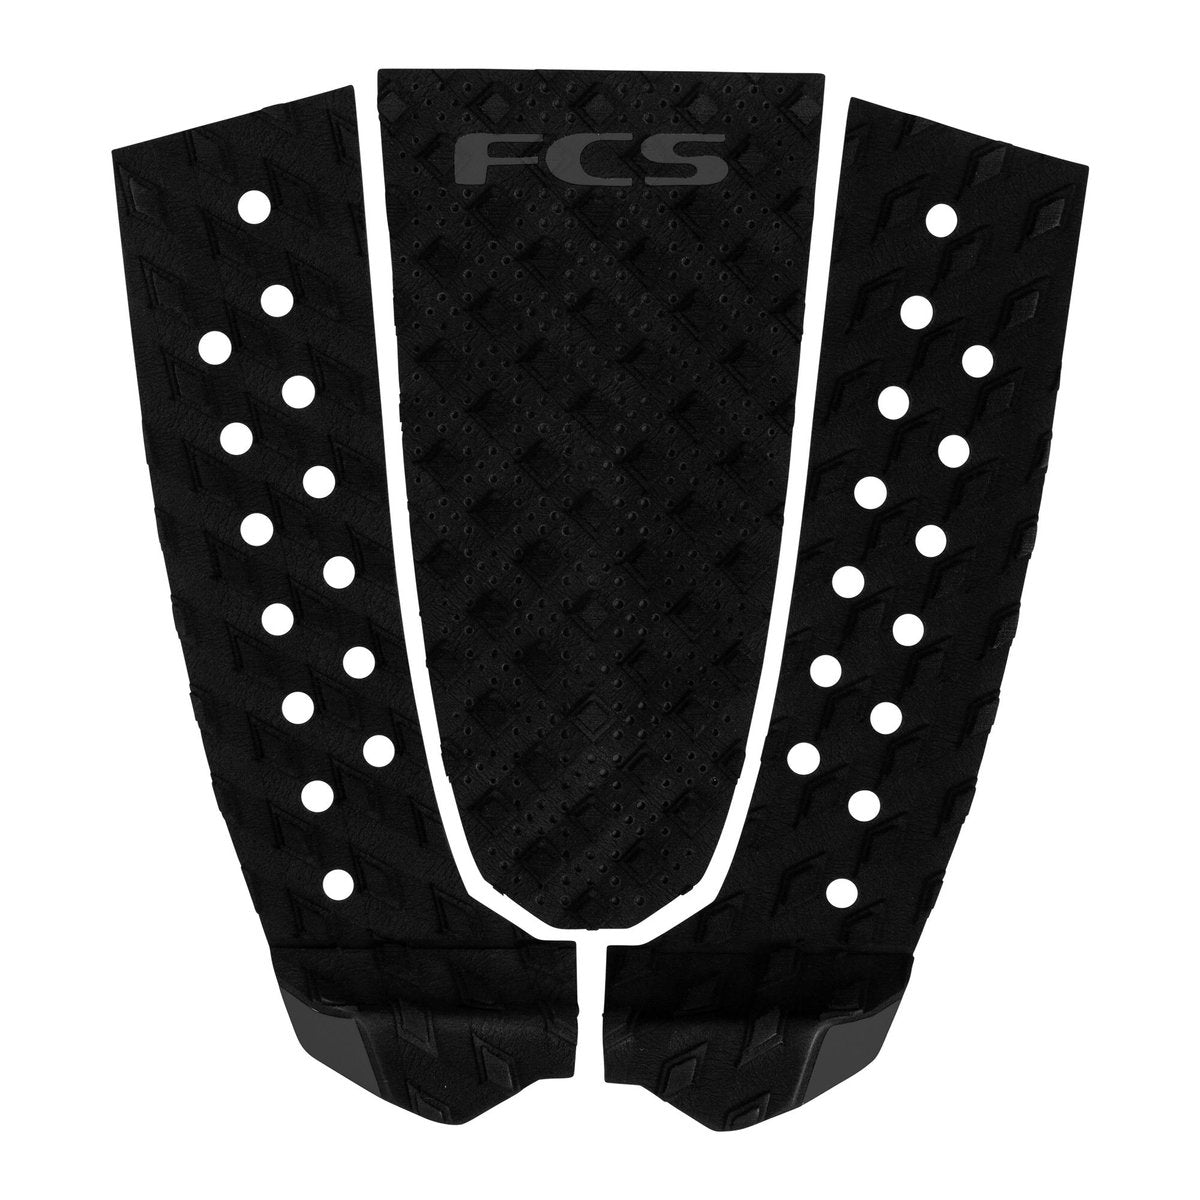 FCS T-3 Traction Pad 3 piece traction, designed to suit performance boards. Traction Pad